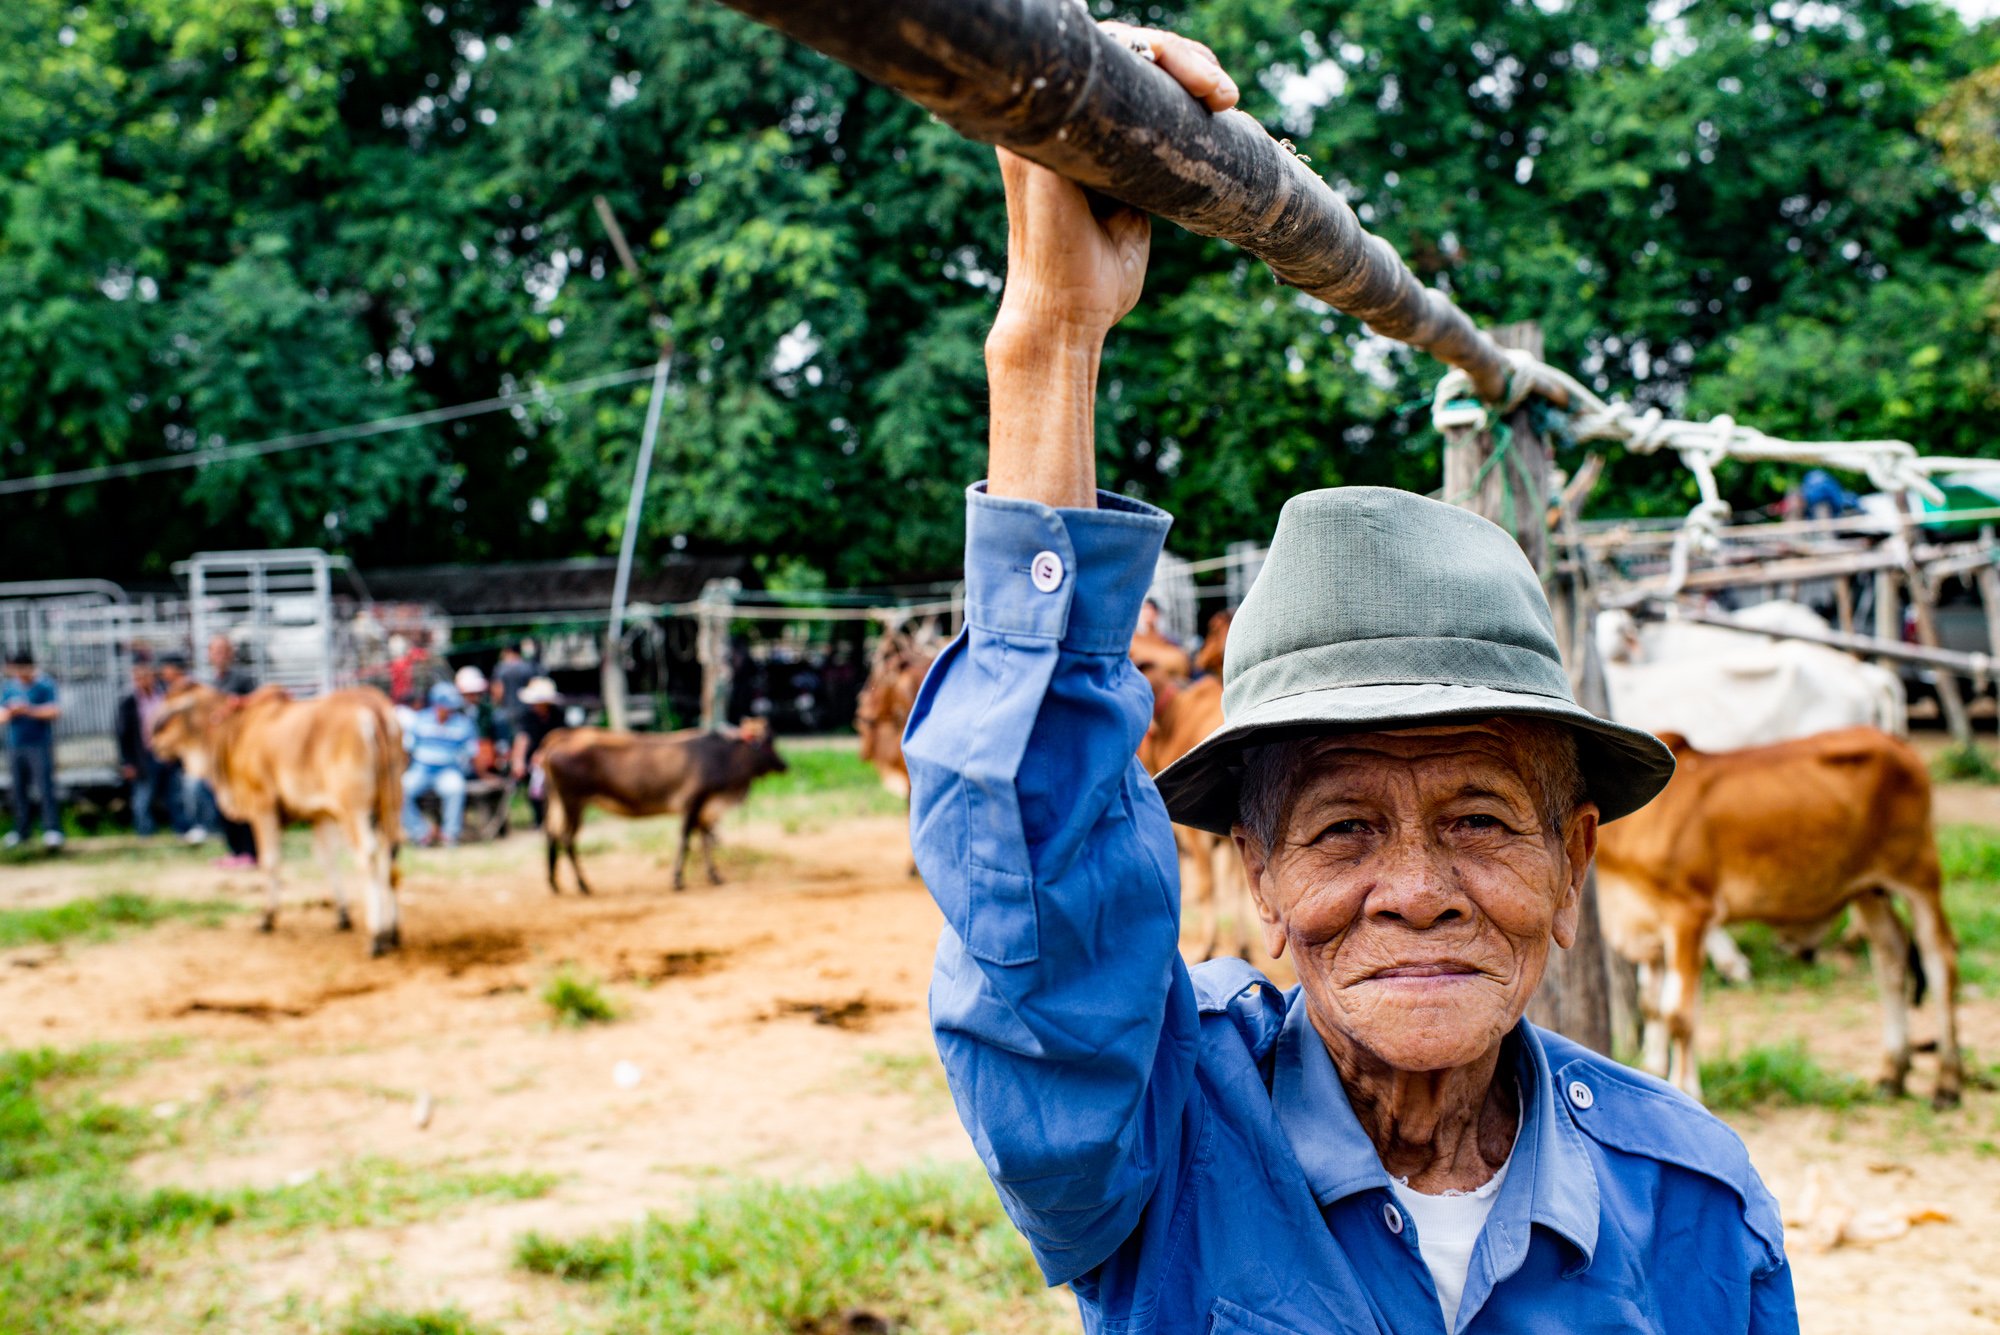 A farmer poses for a photo at the cattle market. © Kevin Landwer-Johan